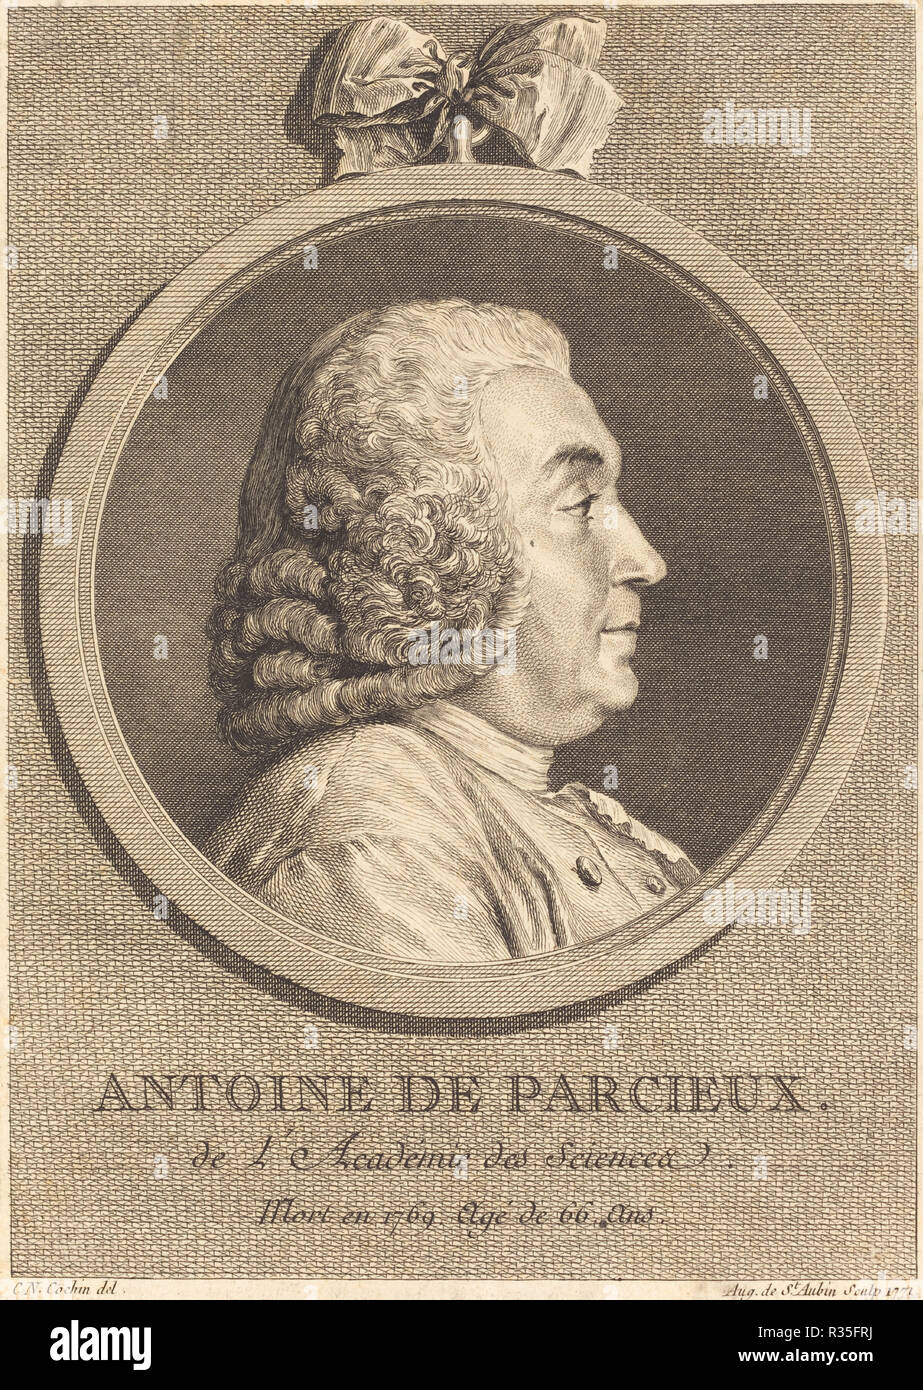 Antoine De Parcieux. Dated: 1771. Dimensions: sheet (trimmed within plate mark): 18.1 x 12.8 cm (7 1/8 x 5 1/16 in.). Medium: engraving over etching on laid paper. Museum: National Gallery of Art, Washington DC. Author: Augustin de Saint-Aubin after Charles-Nicolas Cochin I. Augustin de Saint-Aubin. After Charles Nicolas Cochin II. Stock Photo